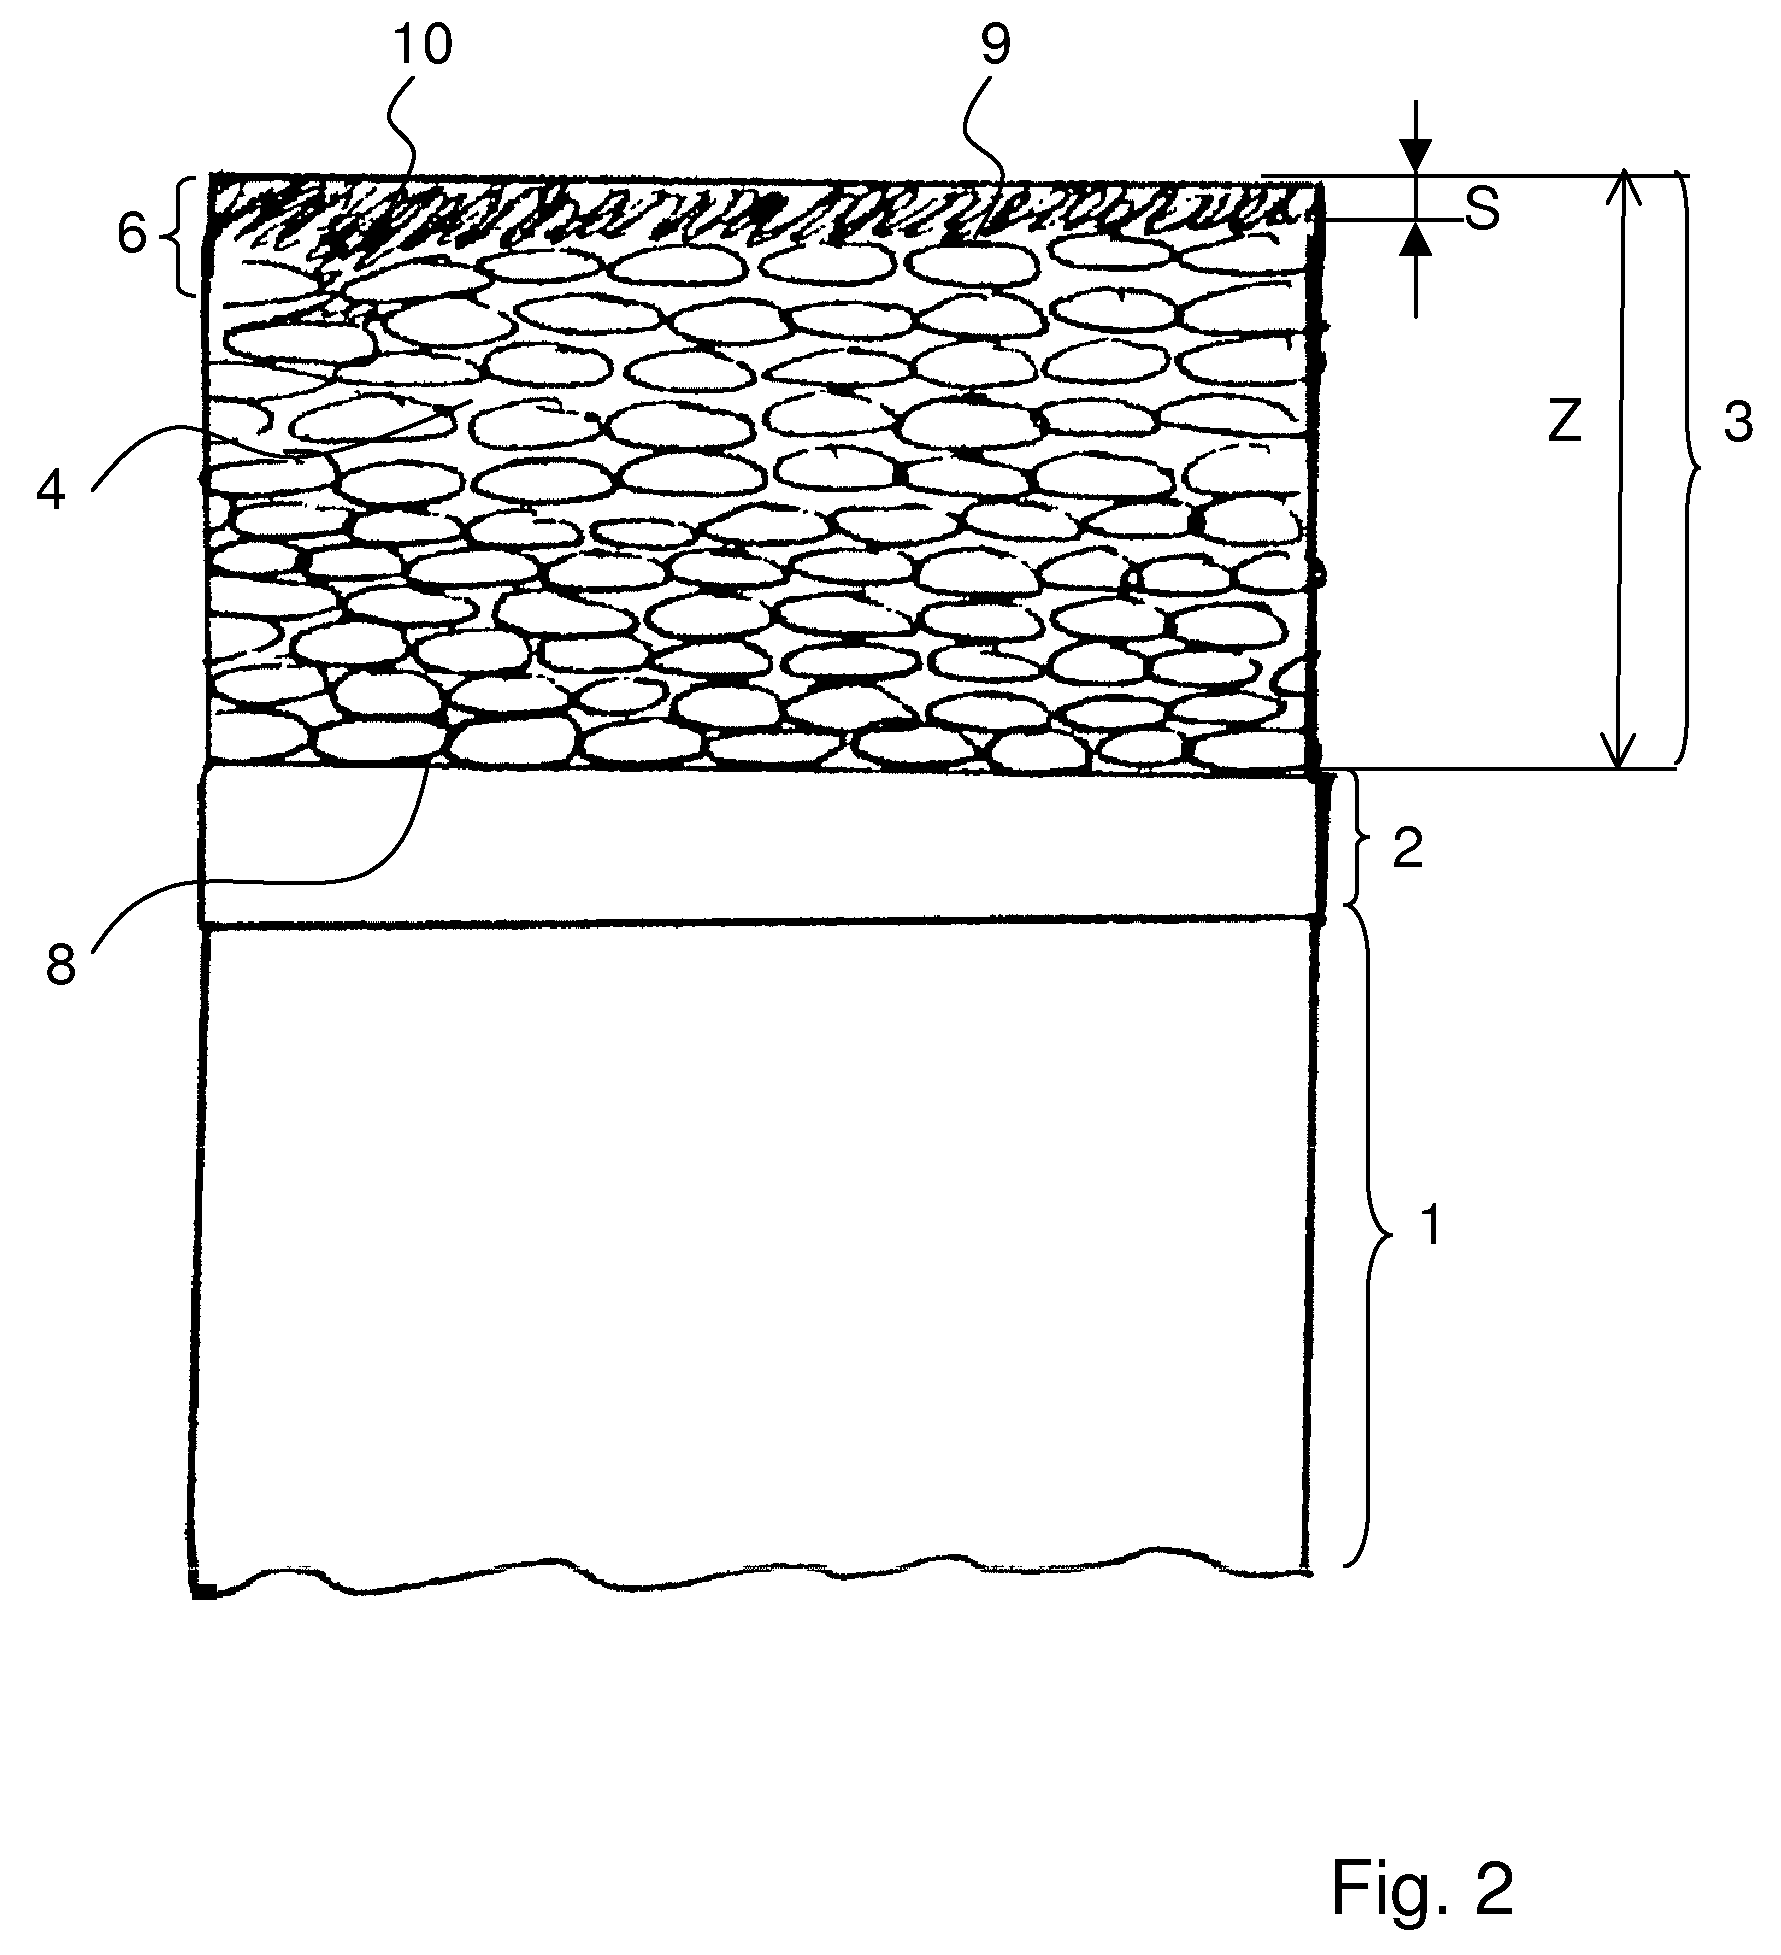 Methods for the protection of a thermal barrier coating system and methods for the renewal of such a protection